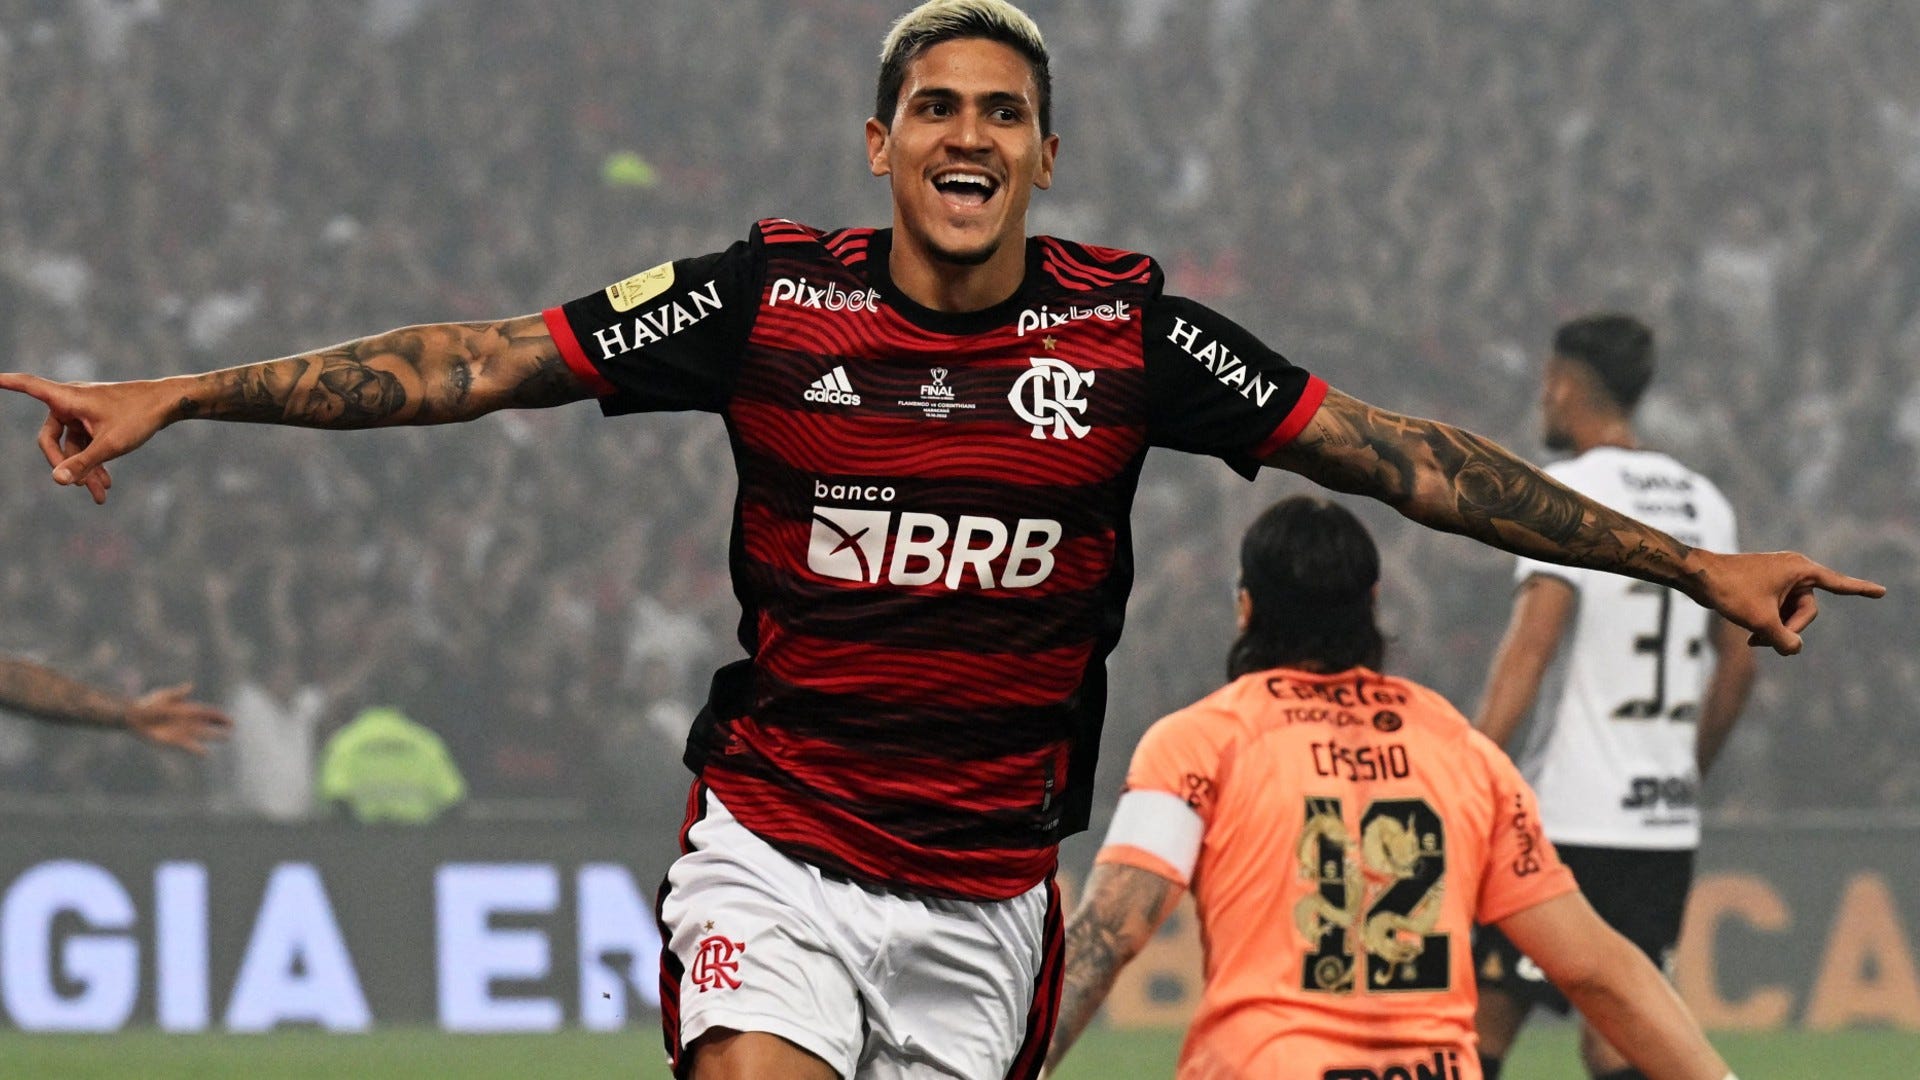 Flamengo's Pedro Receives European Proposals, Must Win Game to